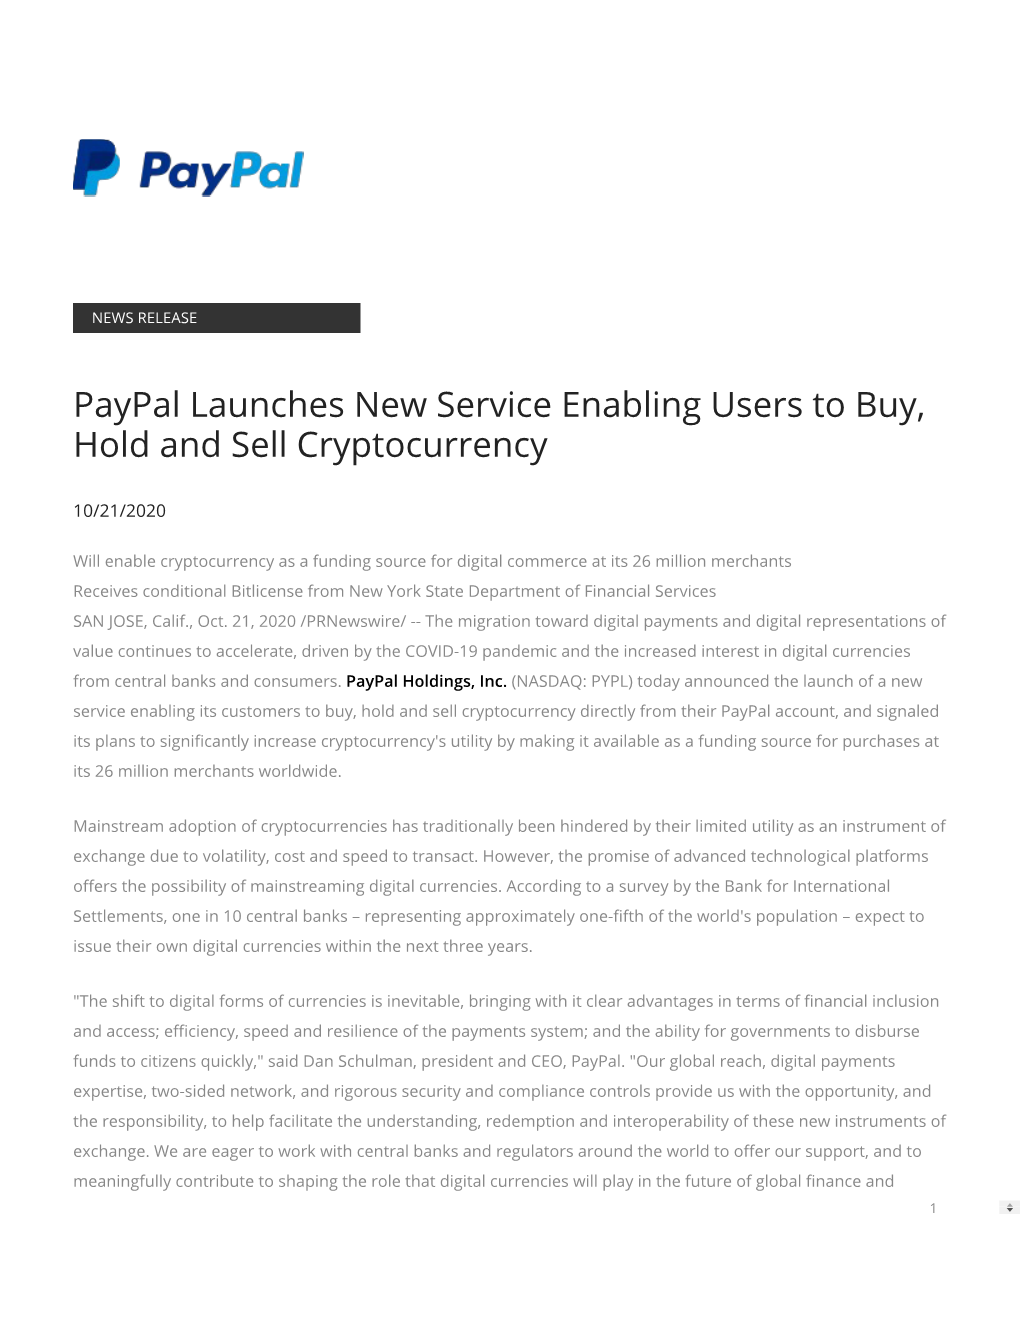 Paypal Launches New Service Enabling Users to Buy, Hold and Sell Cryptocurrency